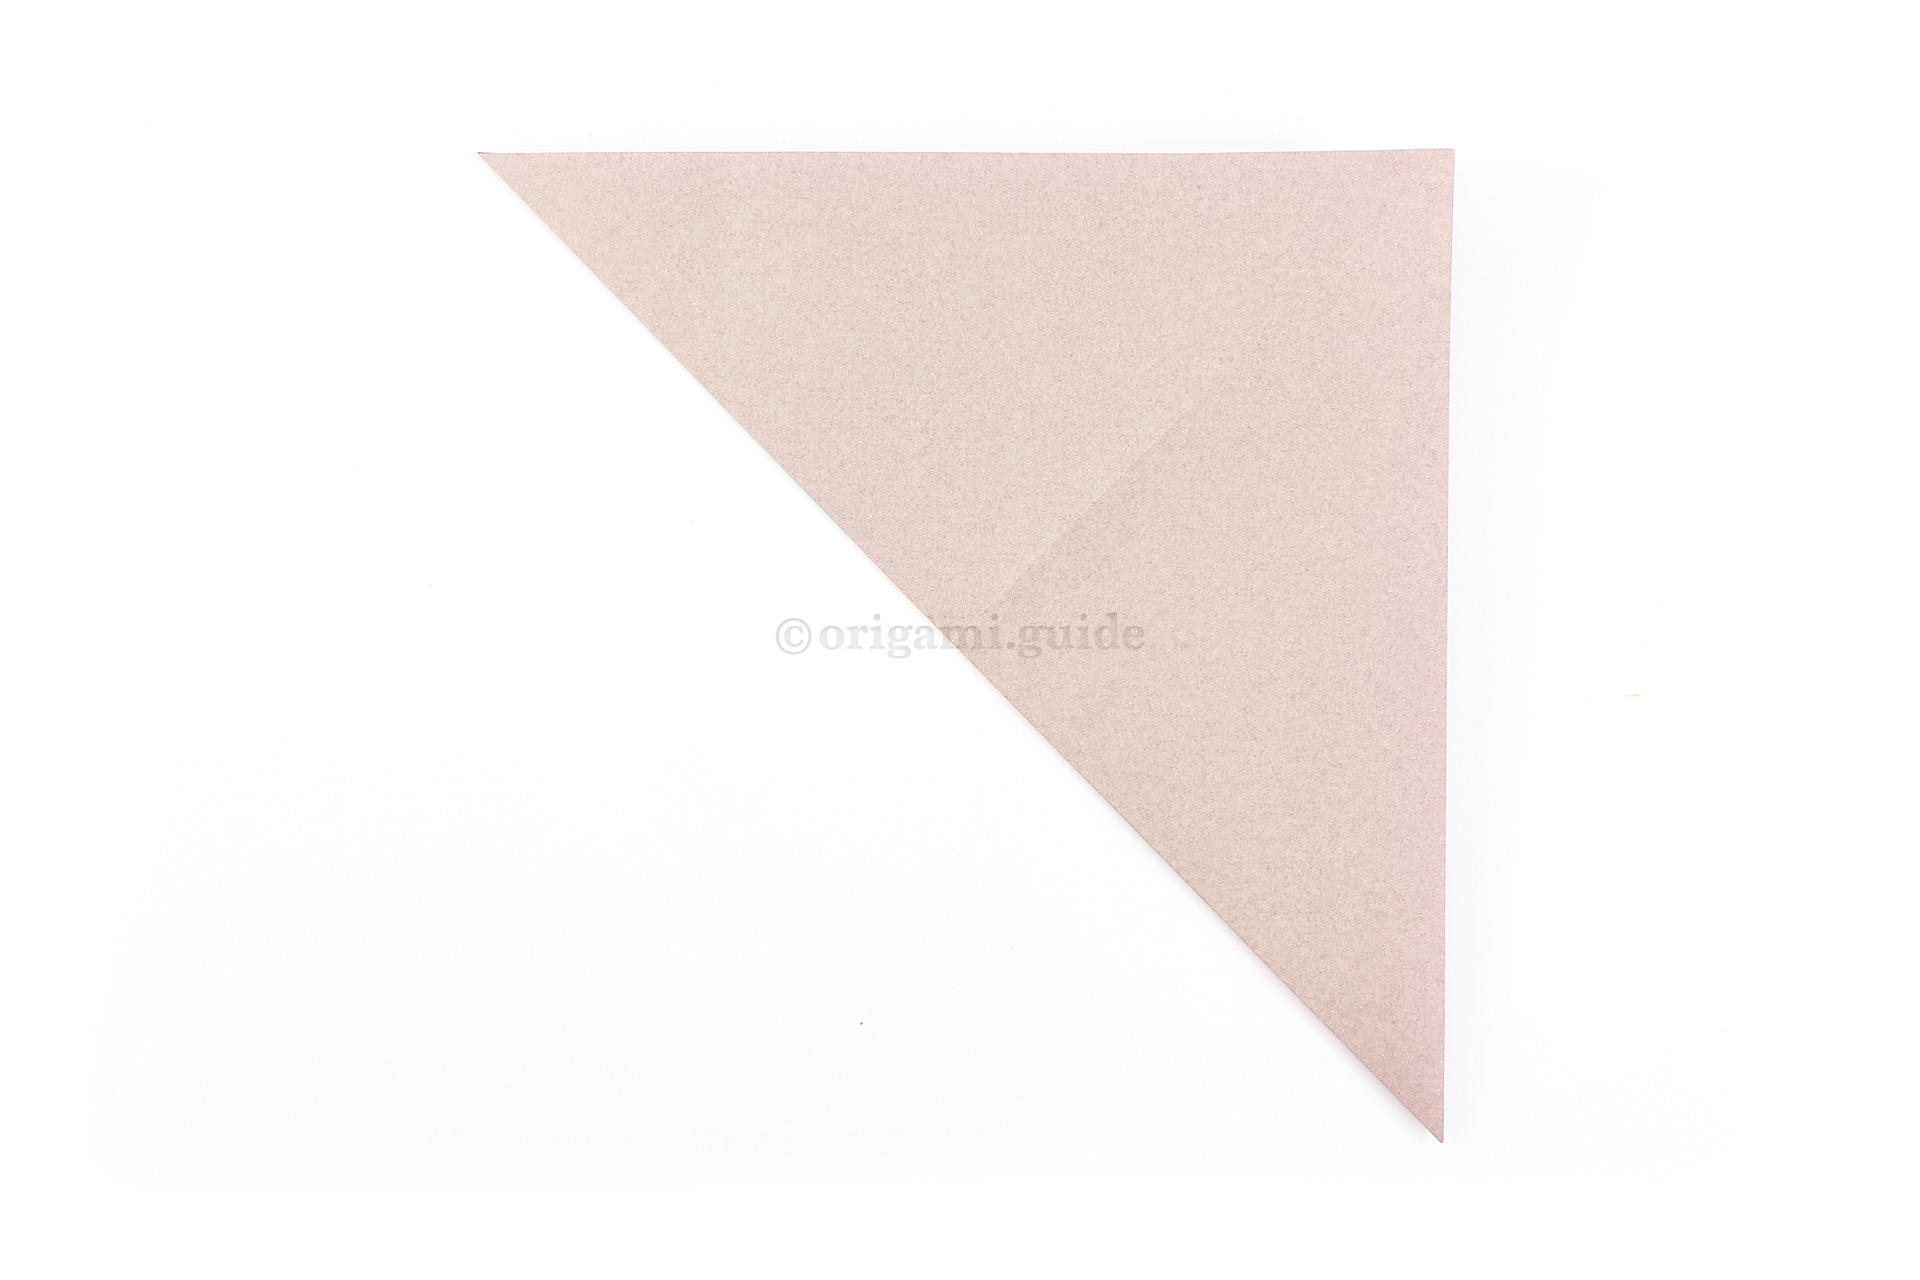 Fold the bottom left point of the paper diagonally up to the top right corner.